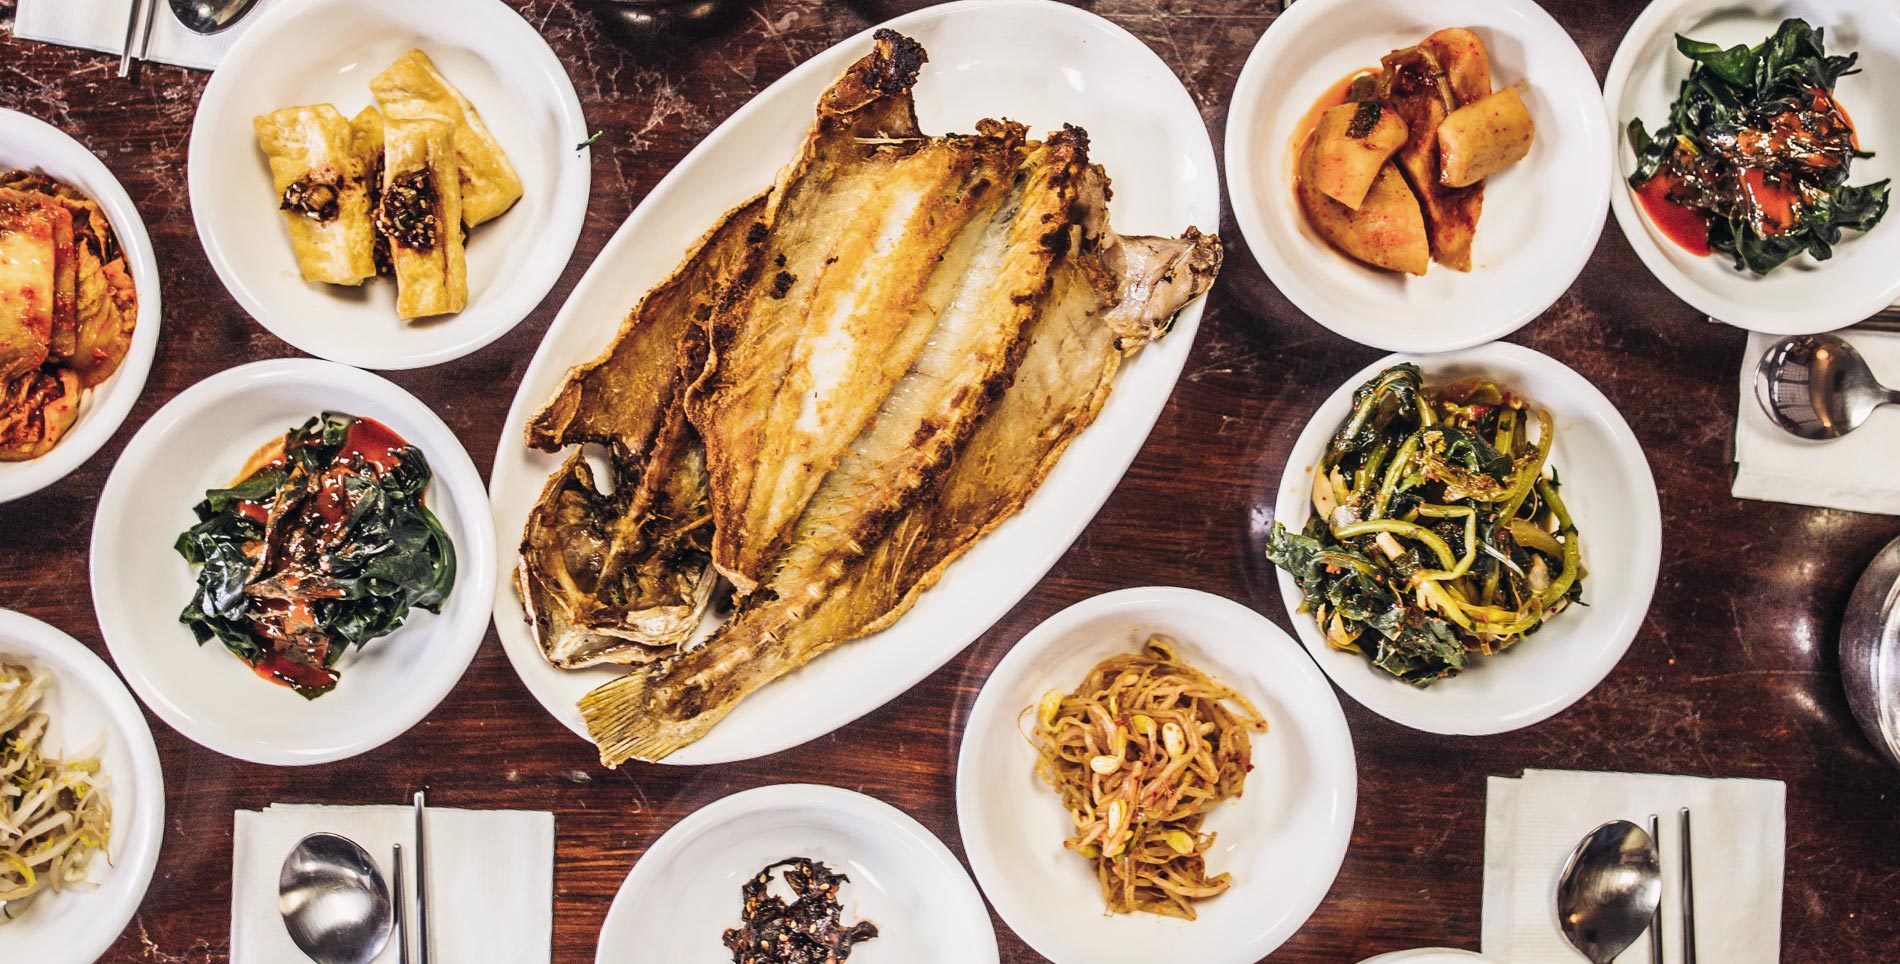 Banchan: The Story of the Korean Side Dish